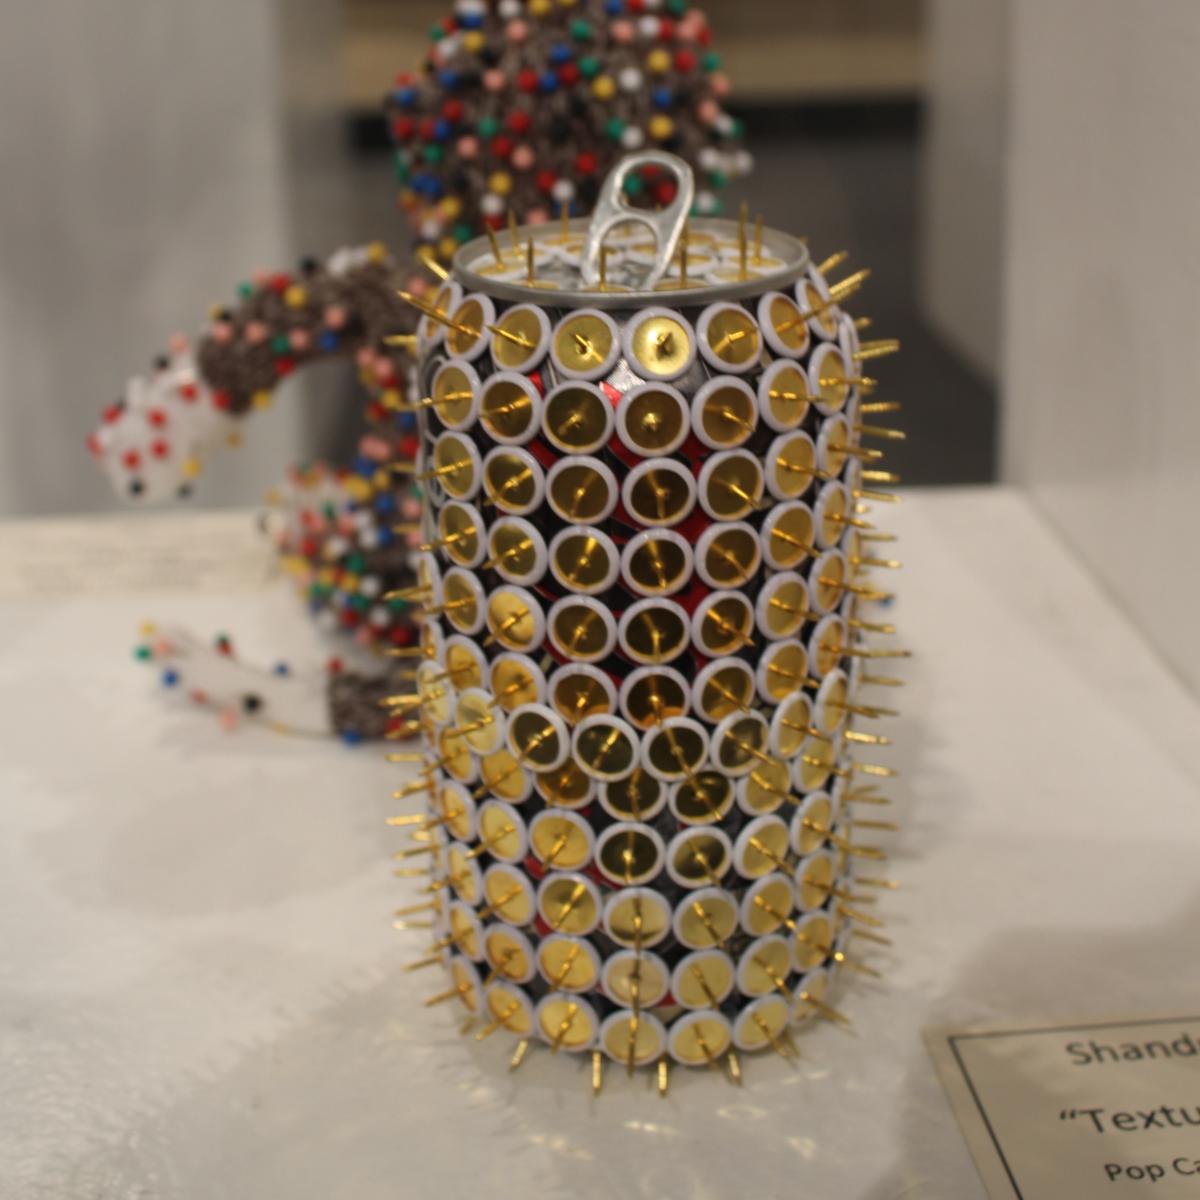 “Texture” by Shandra Dicks - pop can covered with golden thumb tacks sharp end pointed outward.